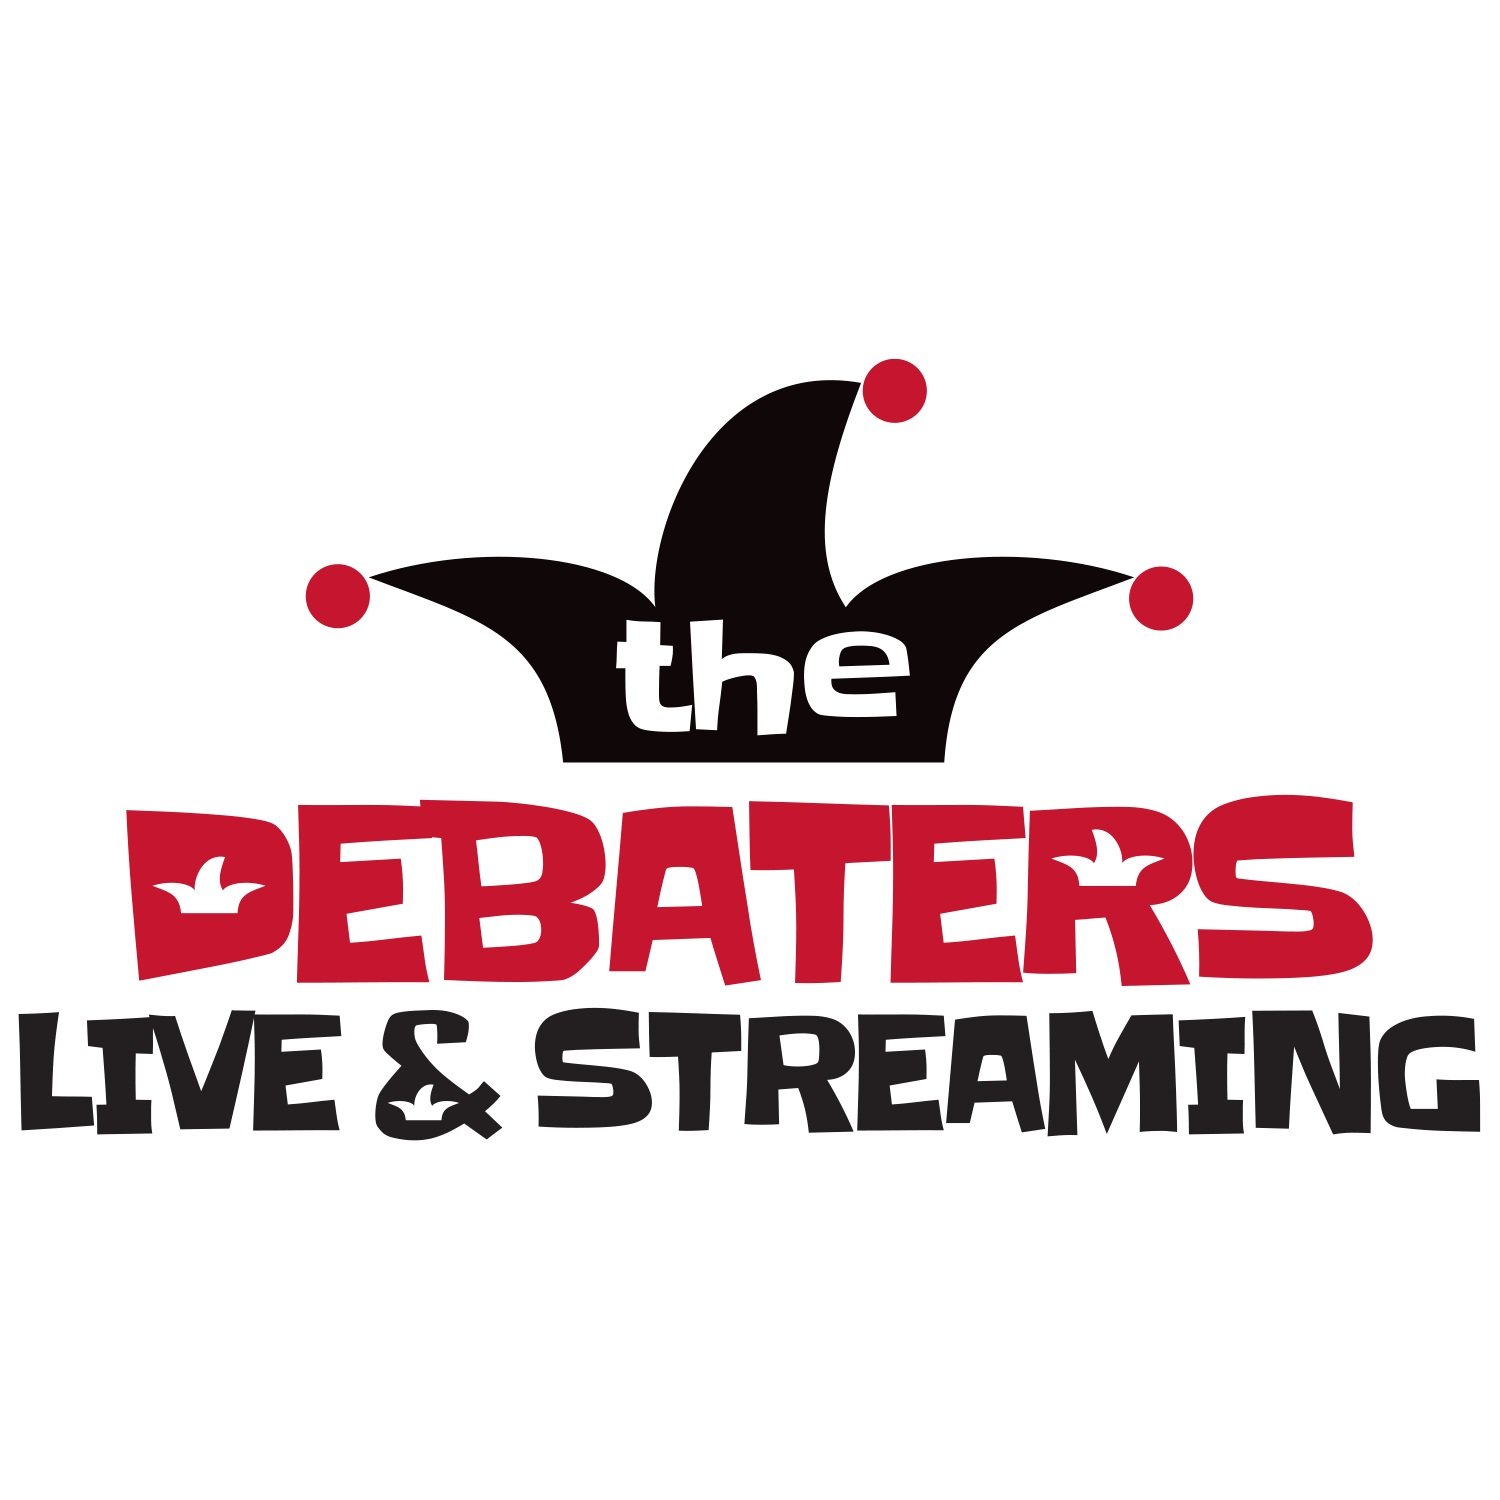 The Debaters Live & Streaming